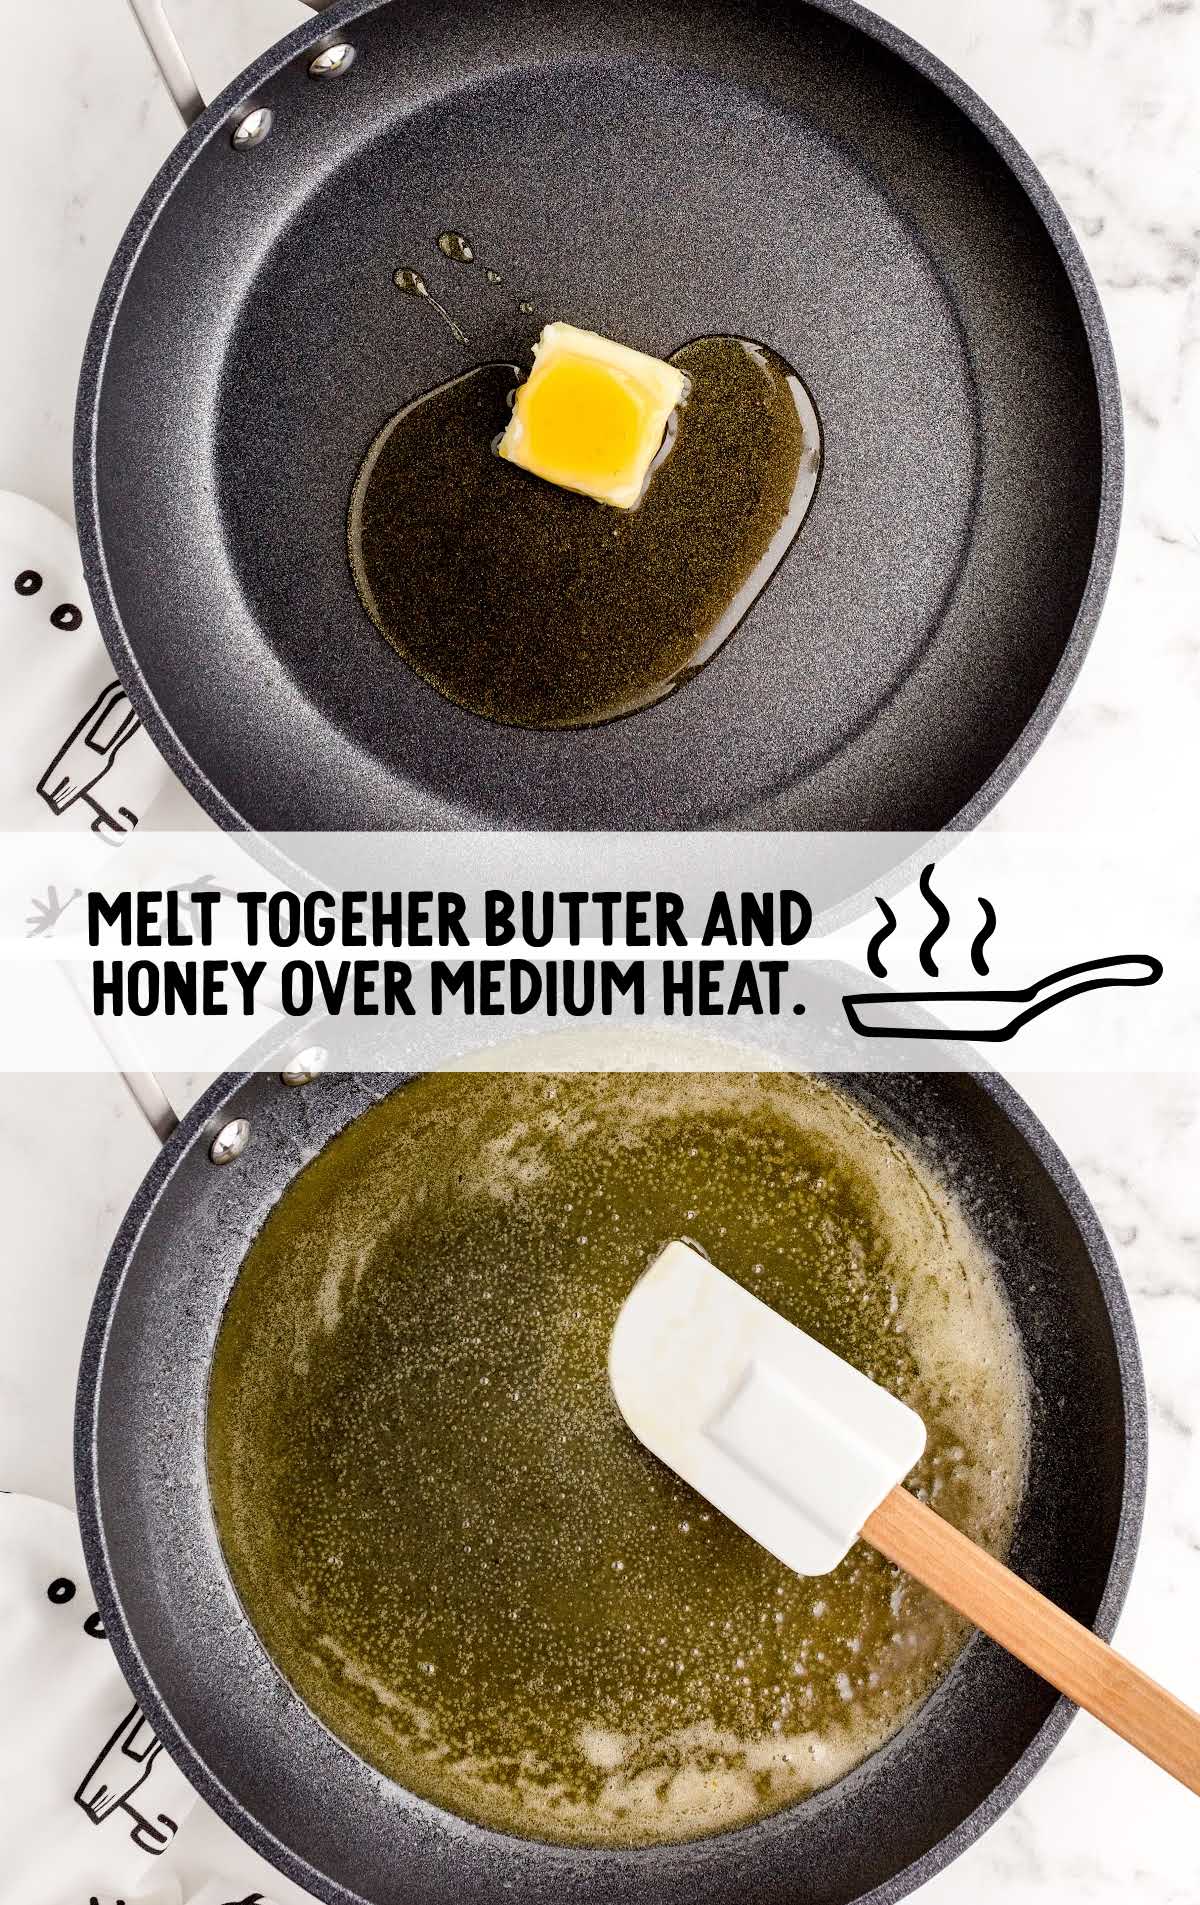 butter and honey being melted and combined in a skillet